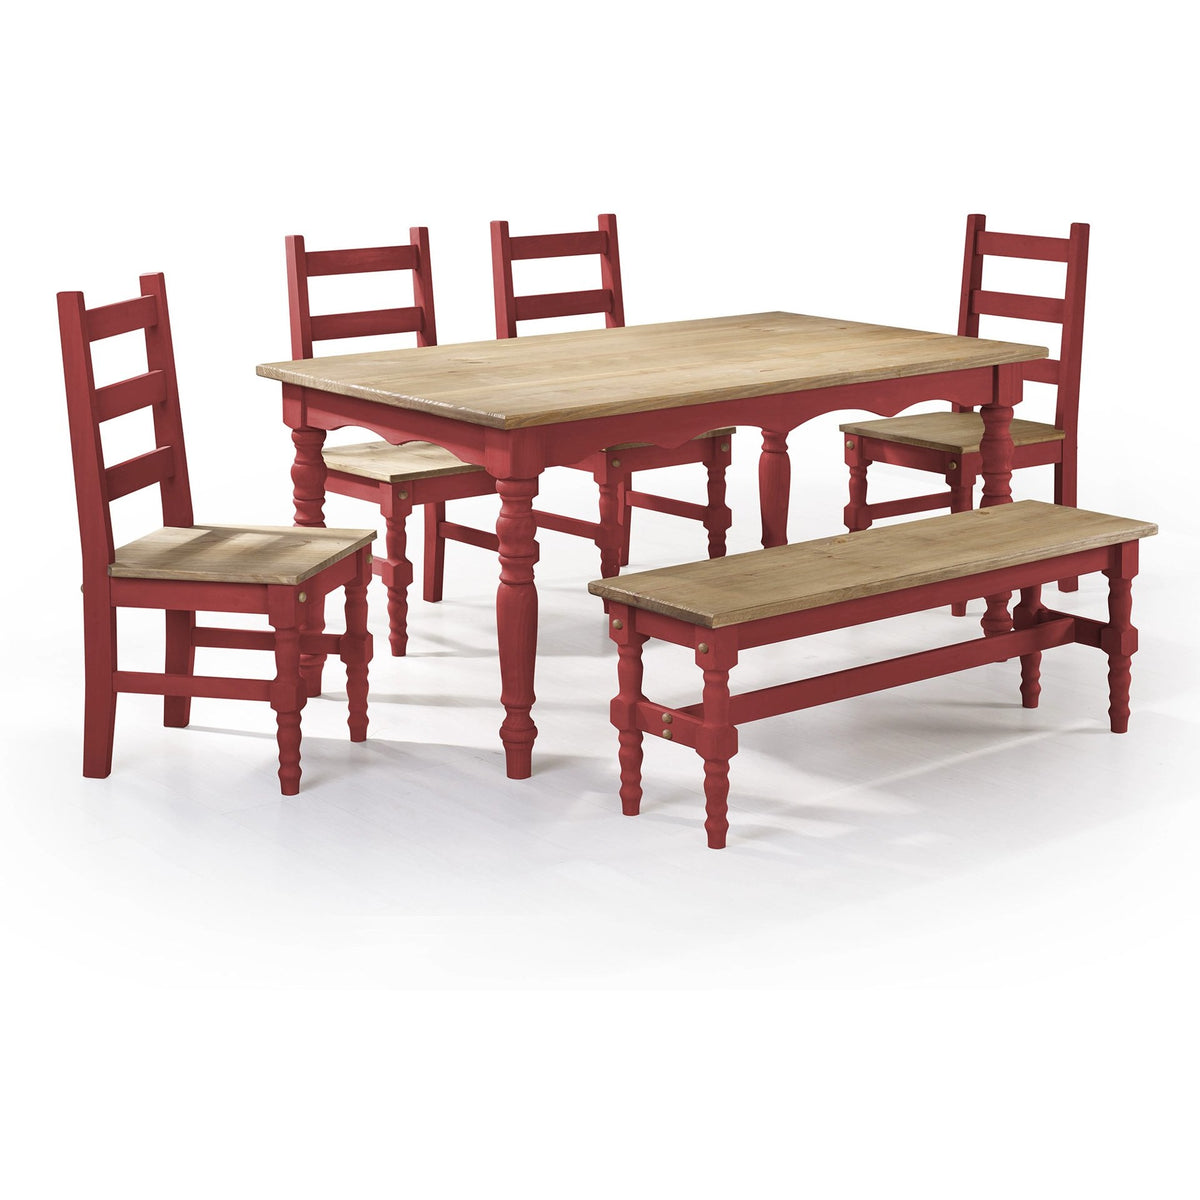 Manhattan Comfort Jay 6-Piece Solid Wood Dining Set with 1 Bench, 4 Chairs, and 1 Table in Red Wash-Minimal & Modern